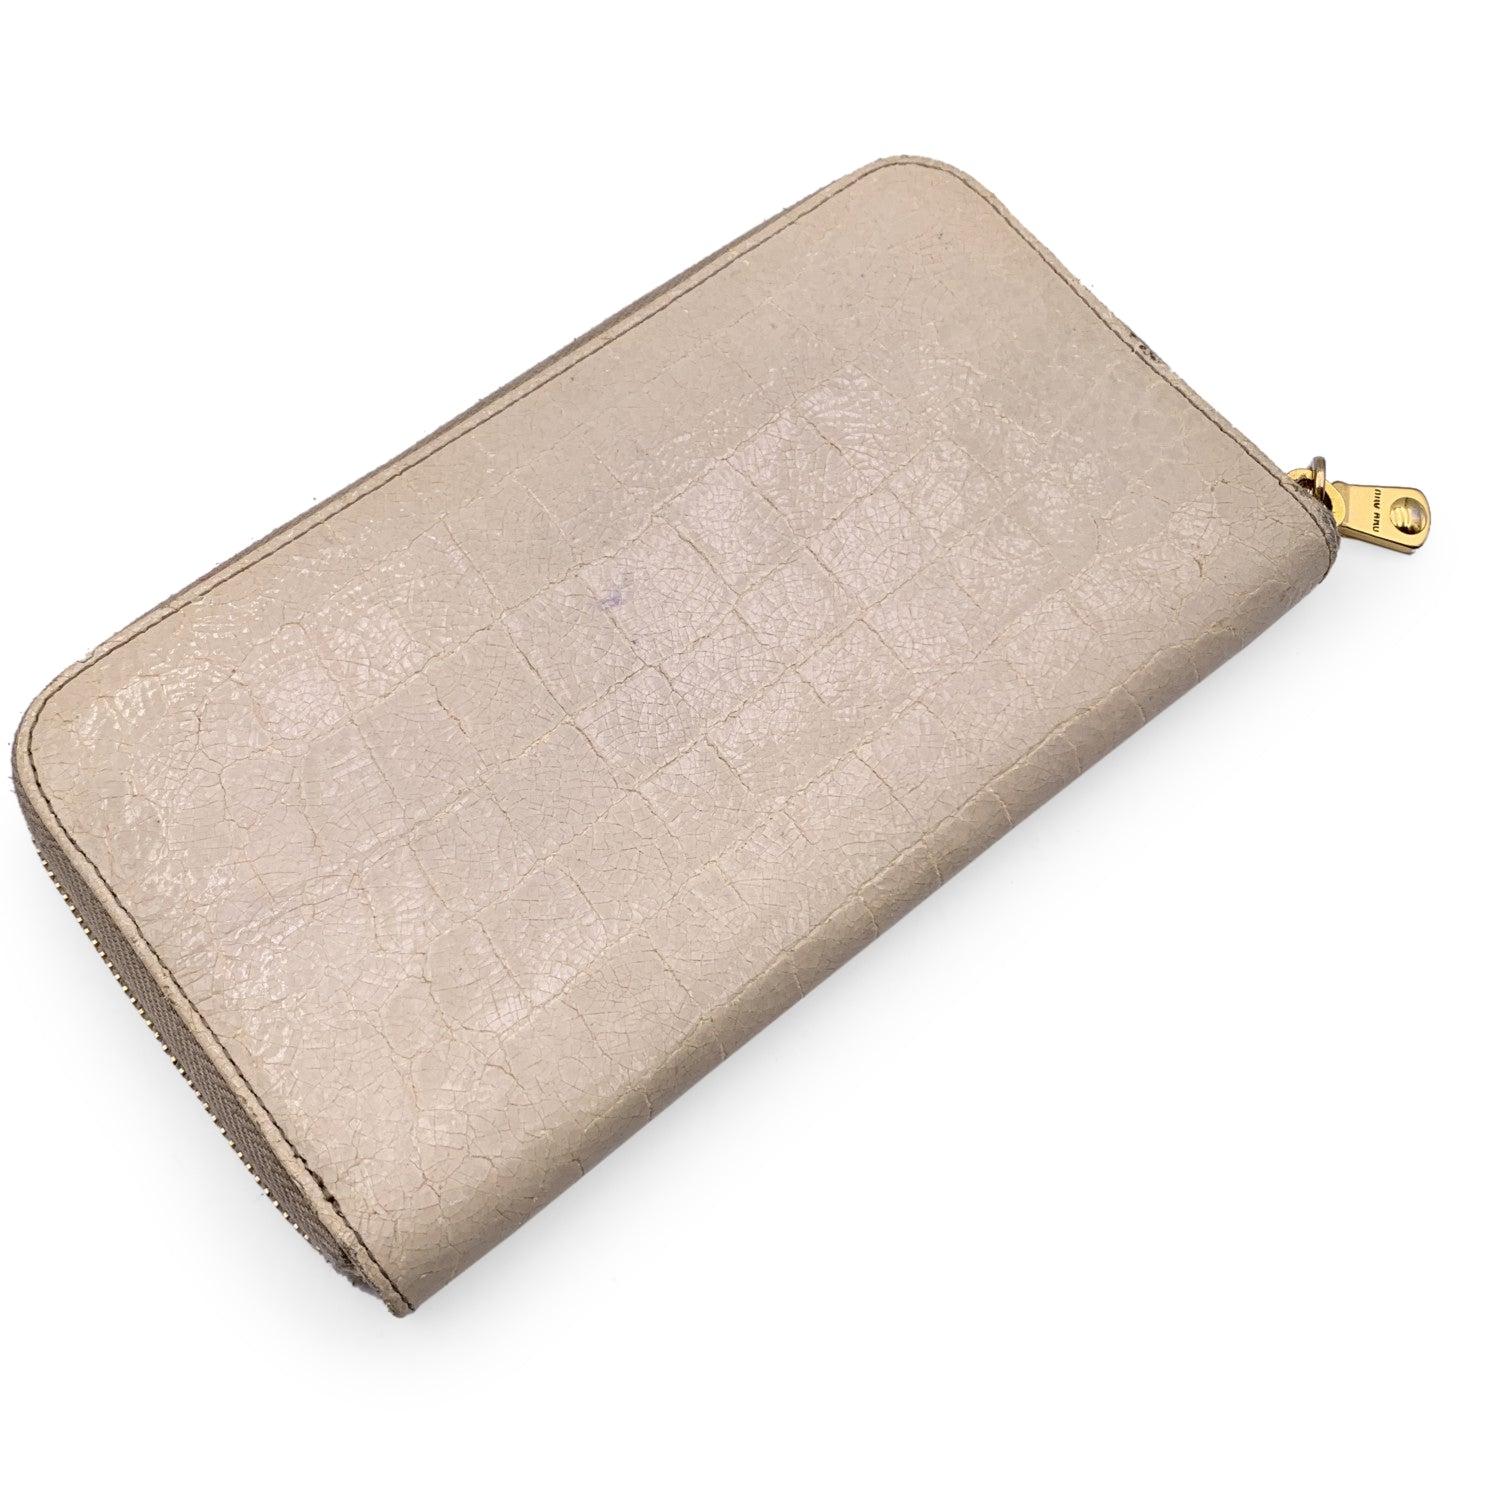 Miu Miu Light Beige Embossed Leather Zippy Long Continental Wallet In Good Condition For Sale In Rome, Rome